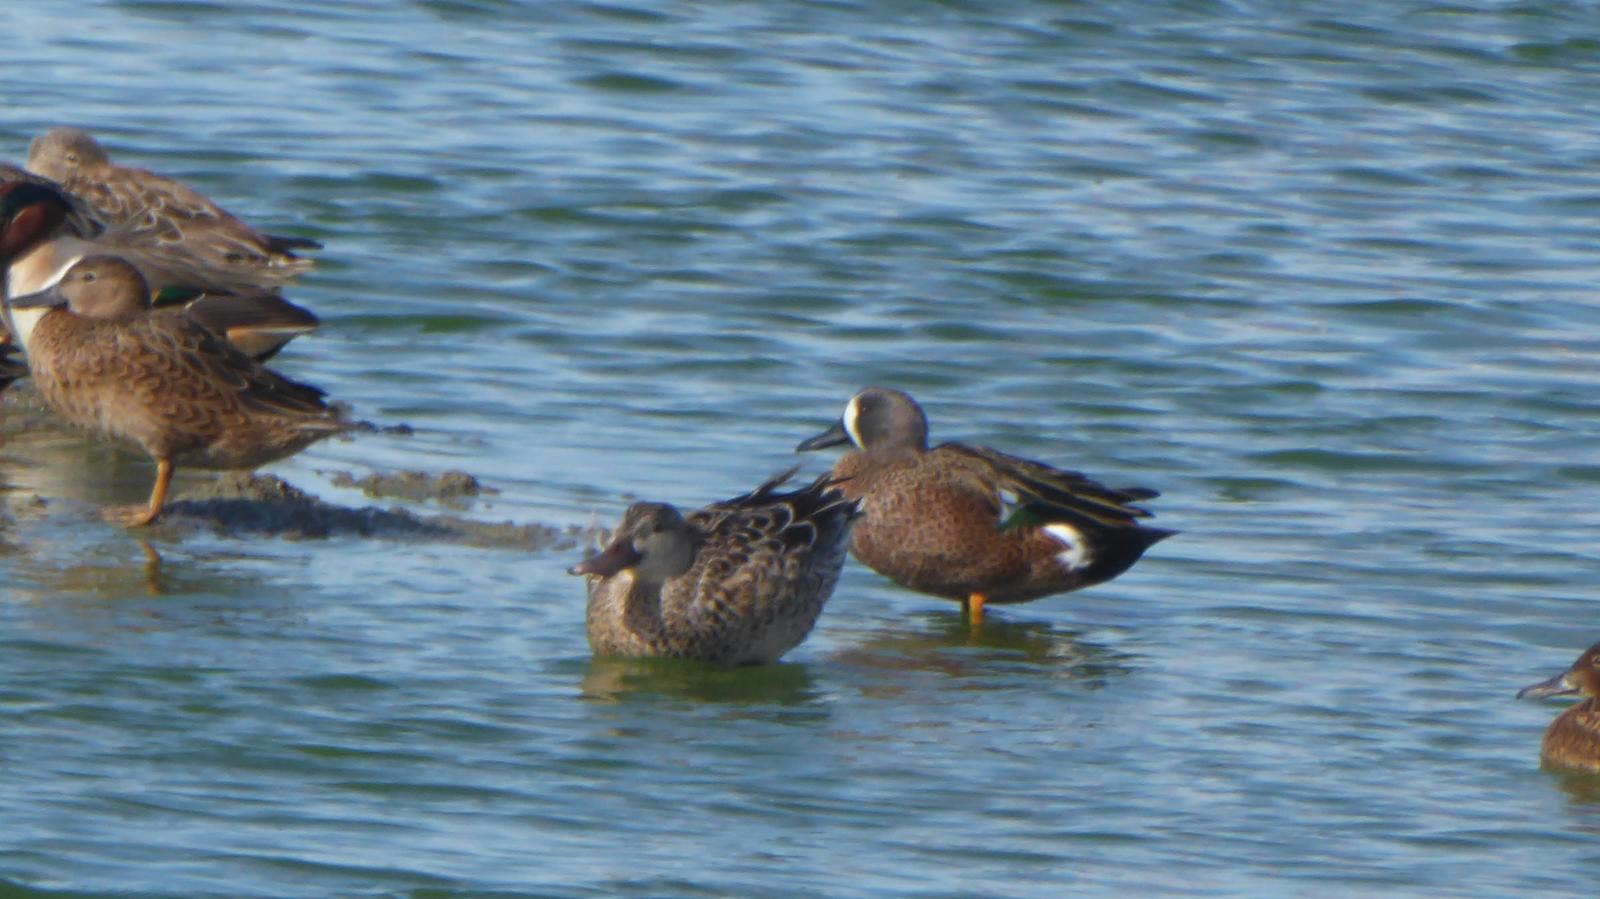 Blue-winged Teal Photo by Daliel Leite